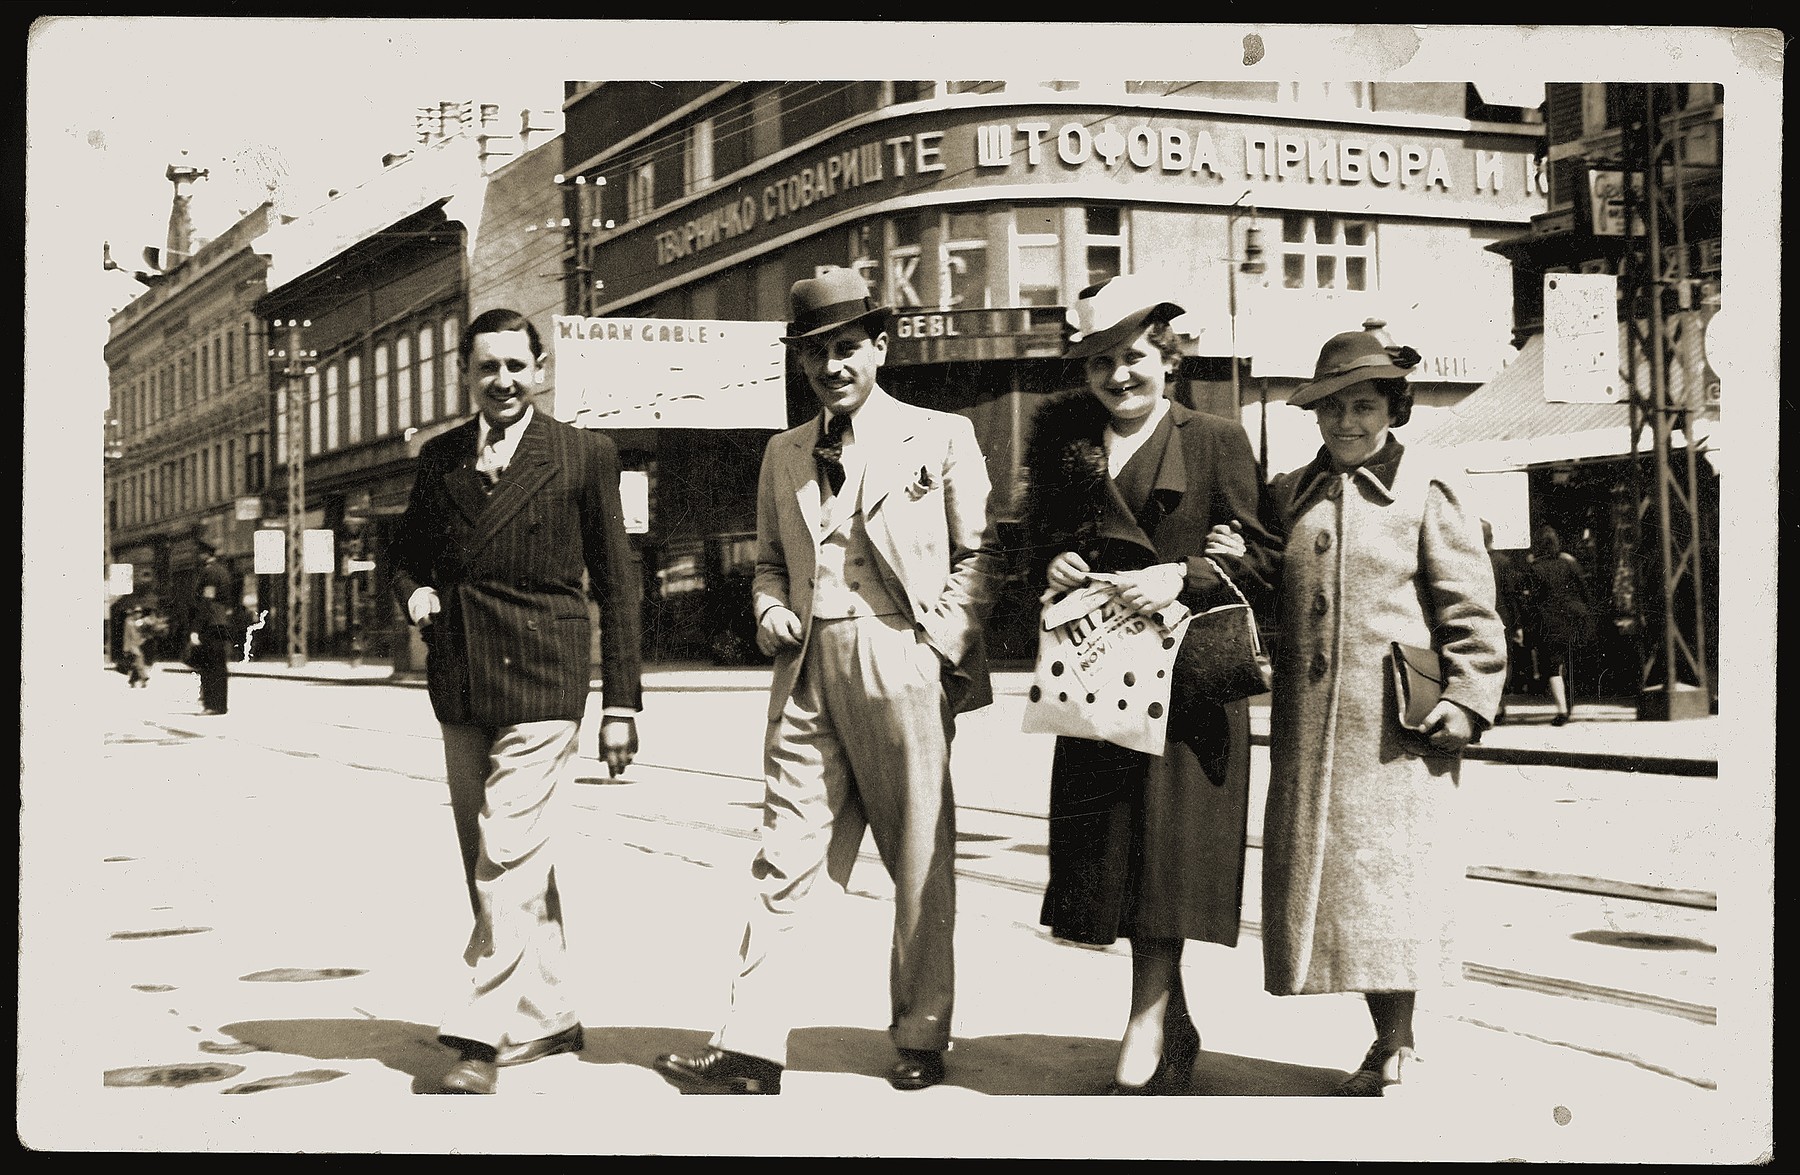 Members of the Mandil family pose on a street in Novi Sad, Yugoslavia.

Pictured are Mosa (Moshe) and Gabriela Mandil (center) with his Mosa's sister Streja (right) and a friend.